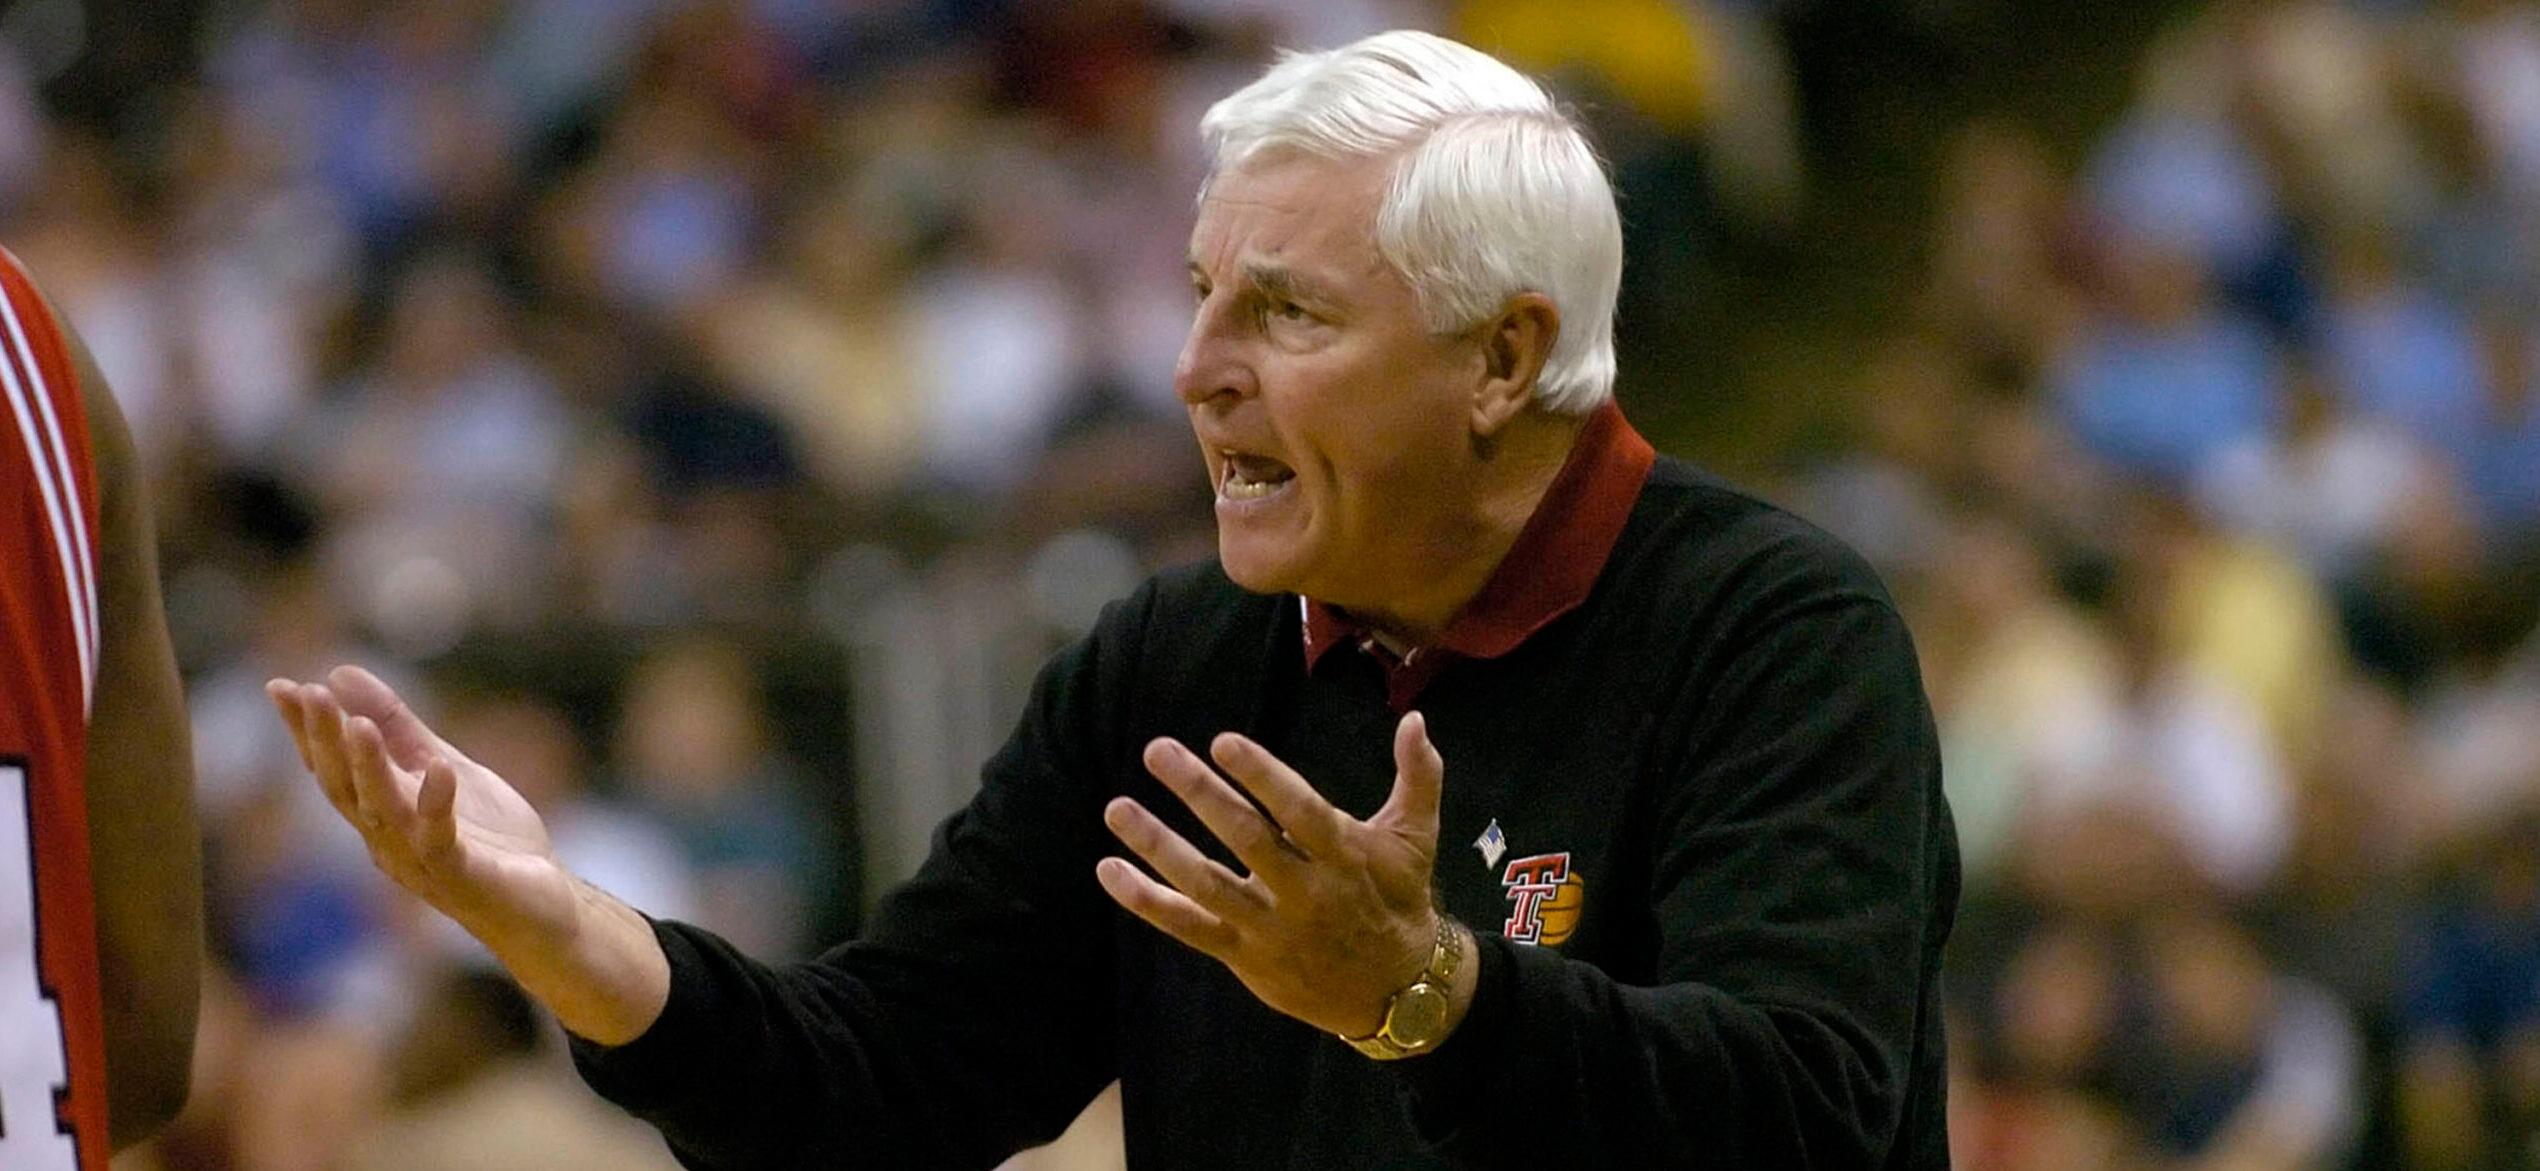 Bob Knight talks to members of his Texas Tech team during a timeout against Boston College in their NCAA East regional first round game